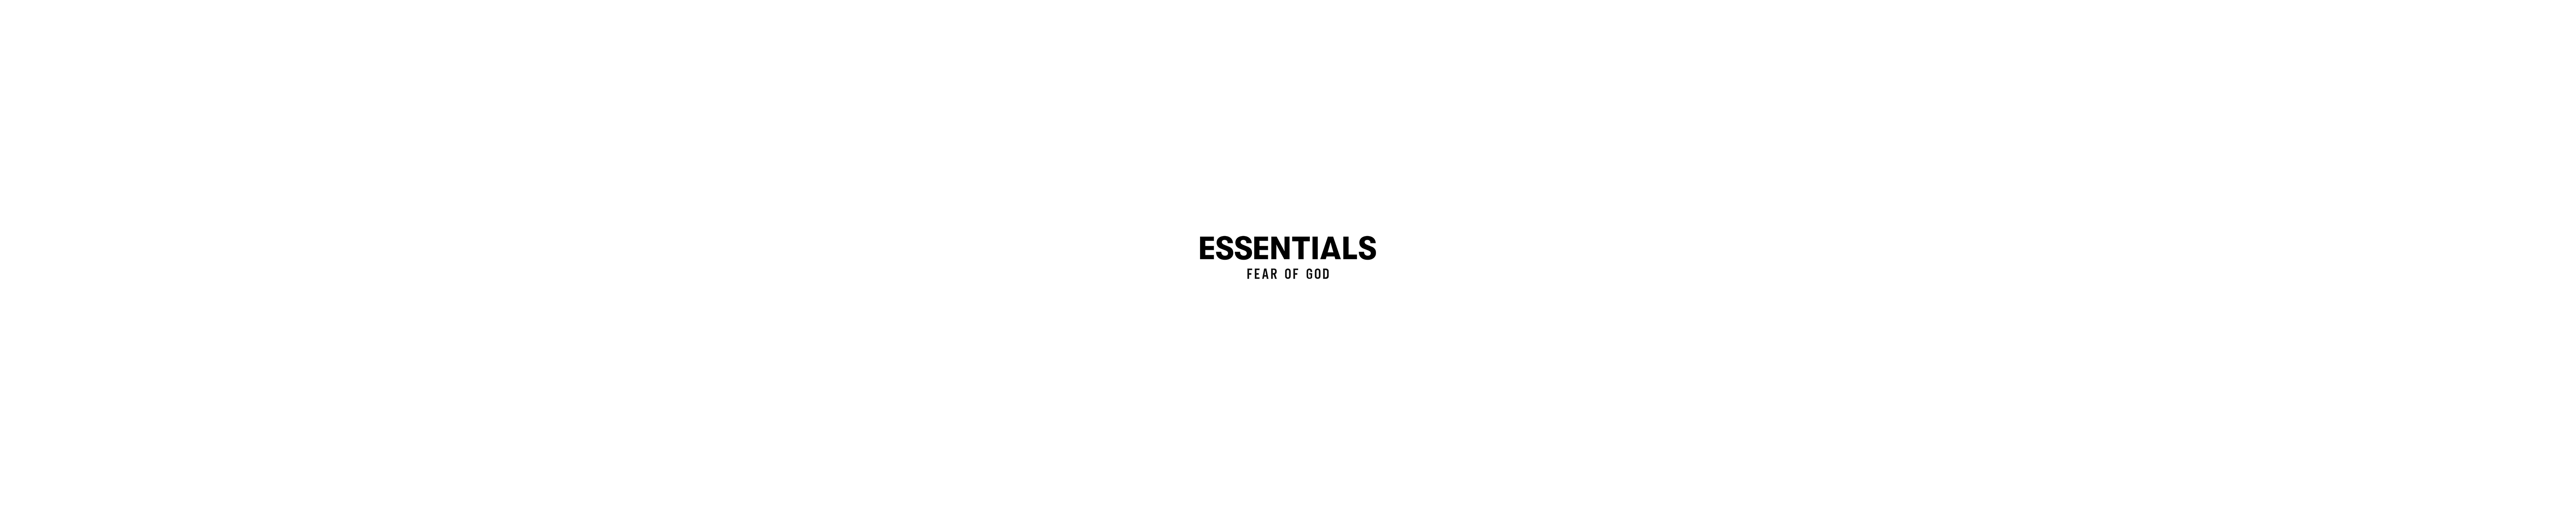 Fear of God Essentials - Everything You Need to Know